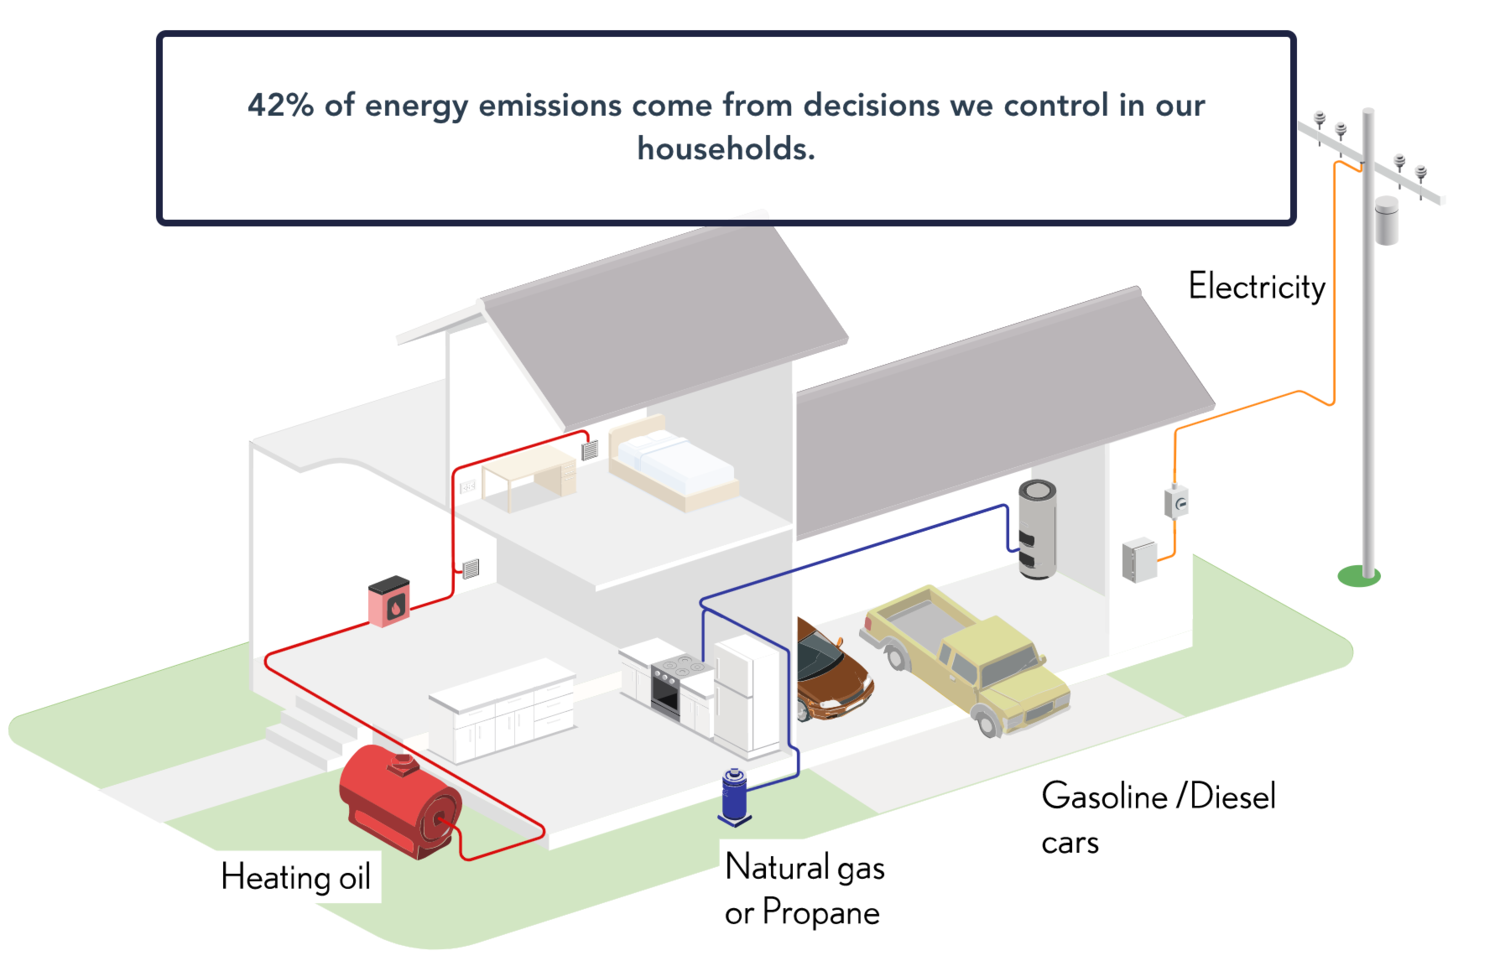 42% of energy emissions come from decisions we control in our households